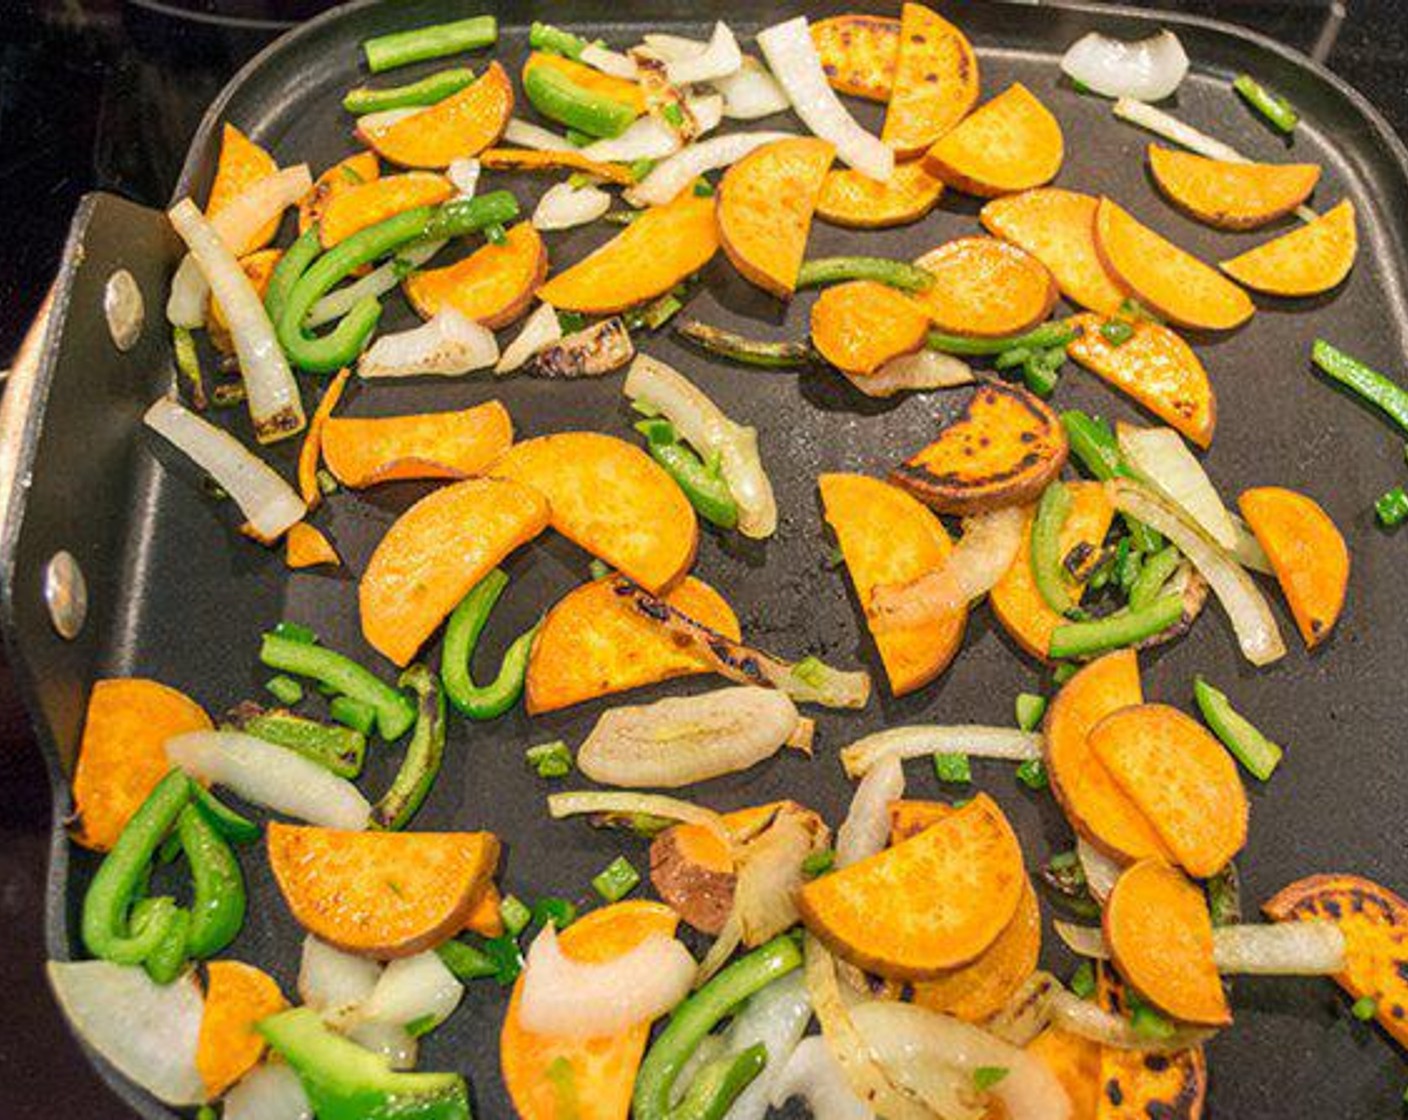 step 1 Add Sweet Potatoes (2), Onion (1/2) and Bell Pepper (1/2) to pan on stove top and cook until tender. Season with a bit of salt and better. Set aside.